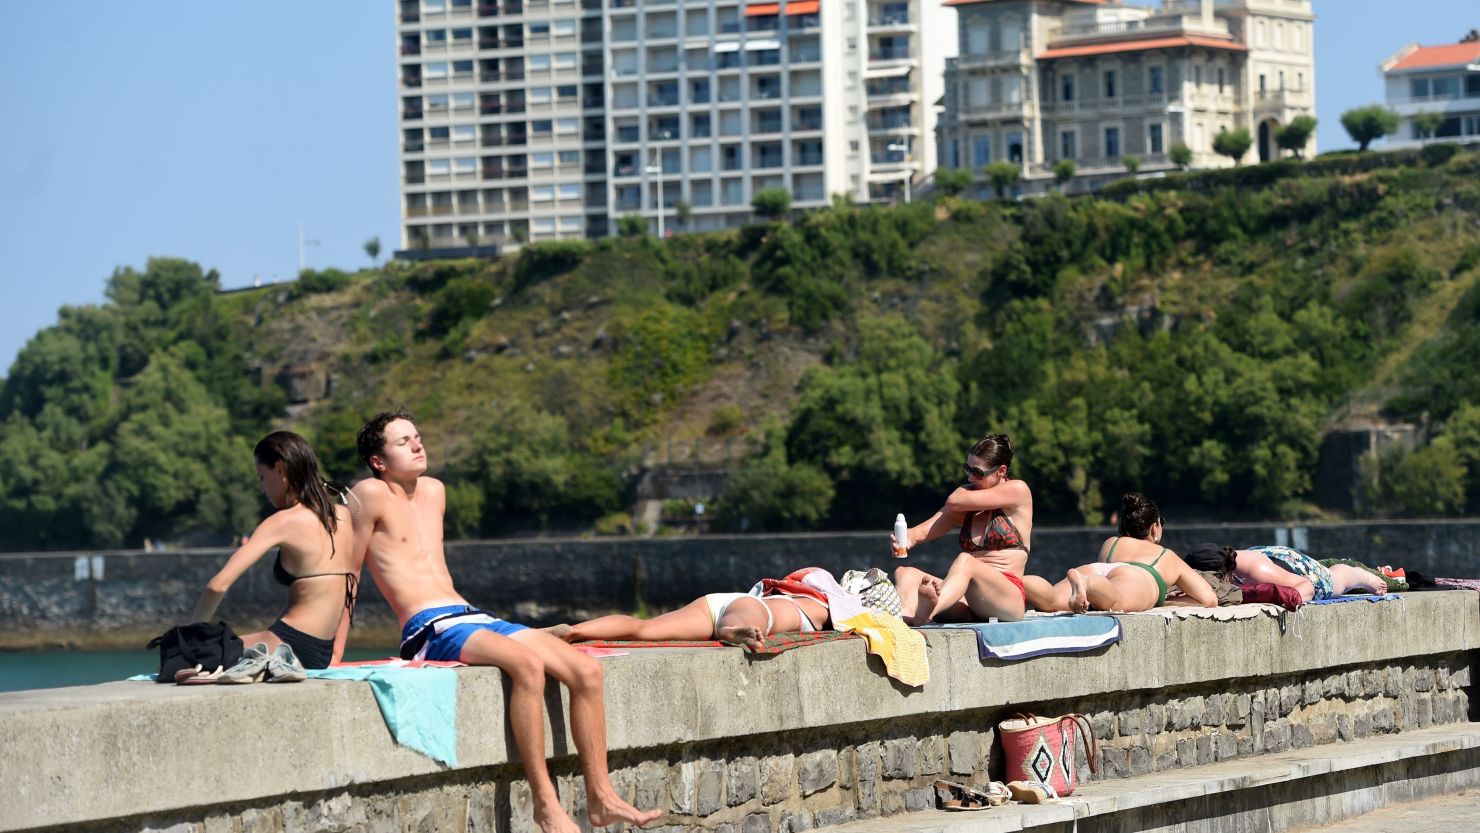 People sunbathe at the Cote des Basques beach in Biarritz in southwestern France. In Paris, temps reached 39 degrees Celsius (102 degrees Fahrenheit), a record for the year.